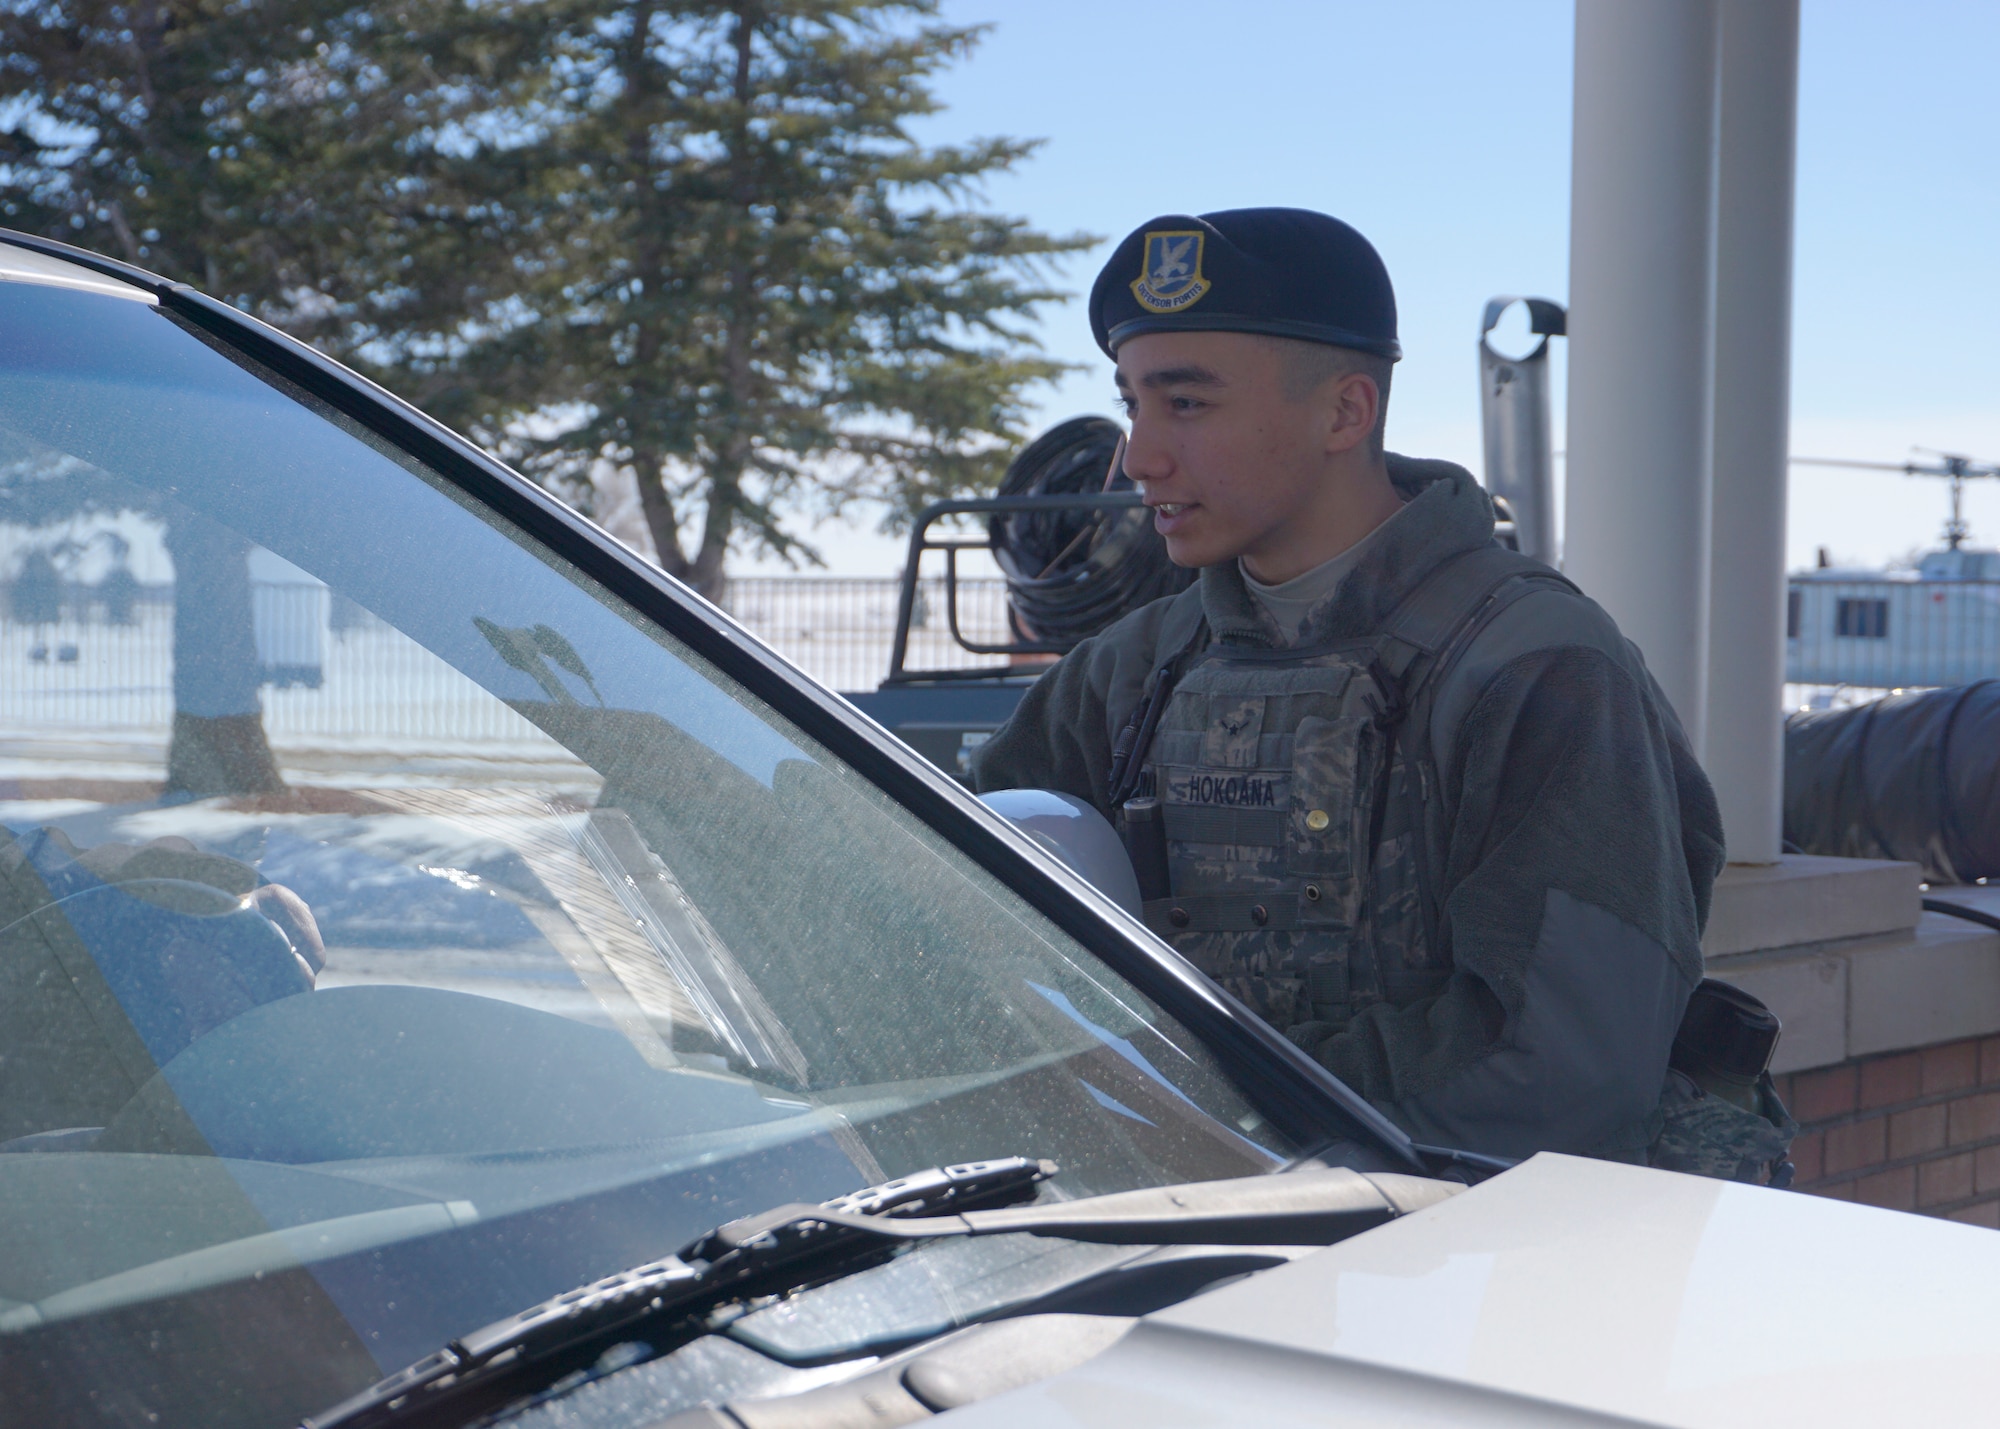 Airman Kaiea Hokoana, 90th Security Forces Squadron, conducts a routine I.D. check at the front gate on F.E. Warren Air Force Base, Wyo., Feb. 23, 2015. Hokoana provides safety and security for the base population as a gate guard. (U.S. Air Force photo by Lan Kim)
